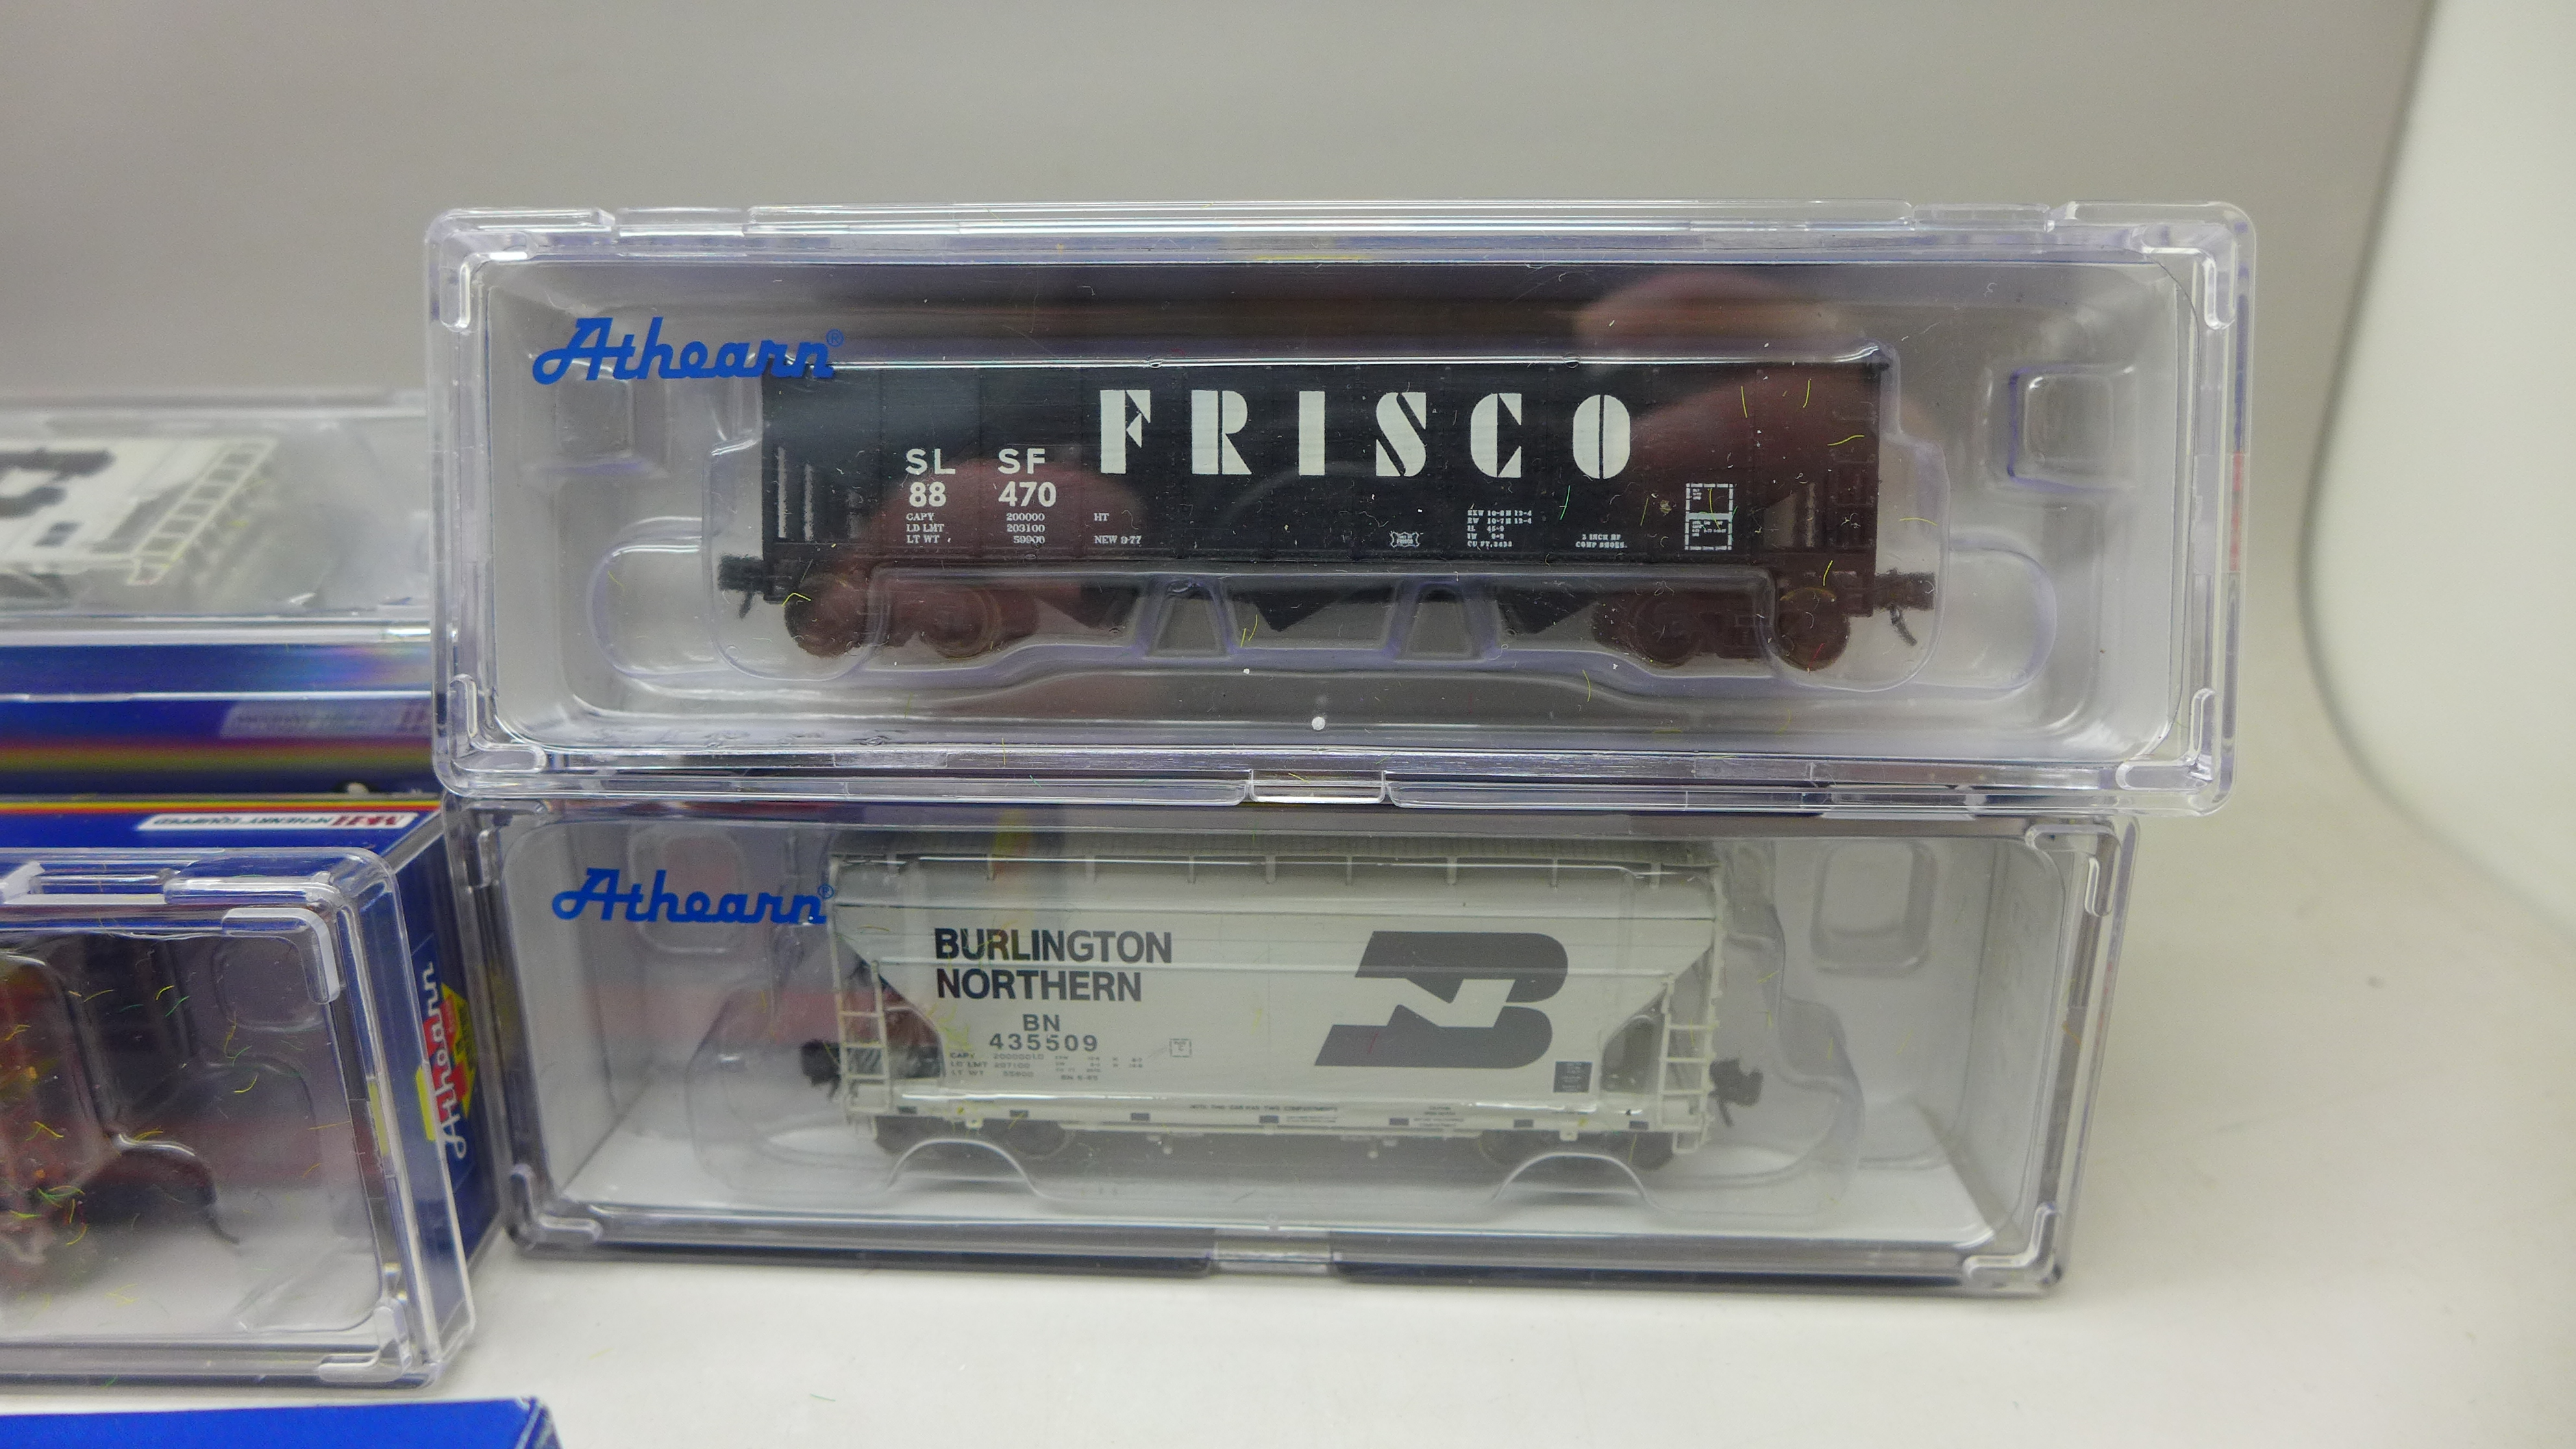 Seven N gauge Athearn railway wagons, boxed - Image 5 of 6